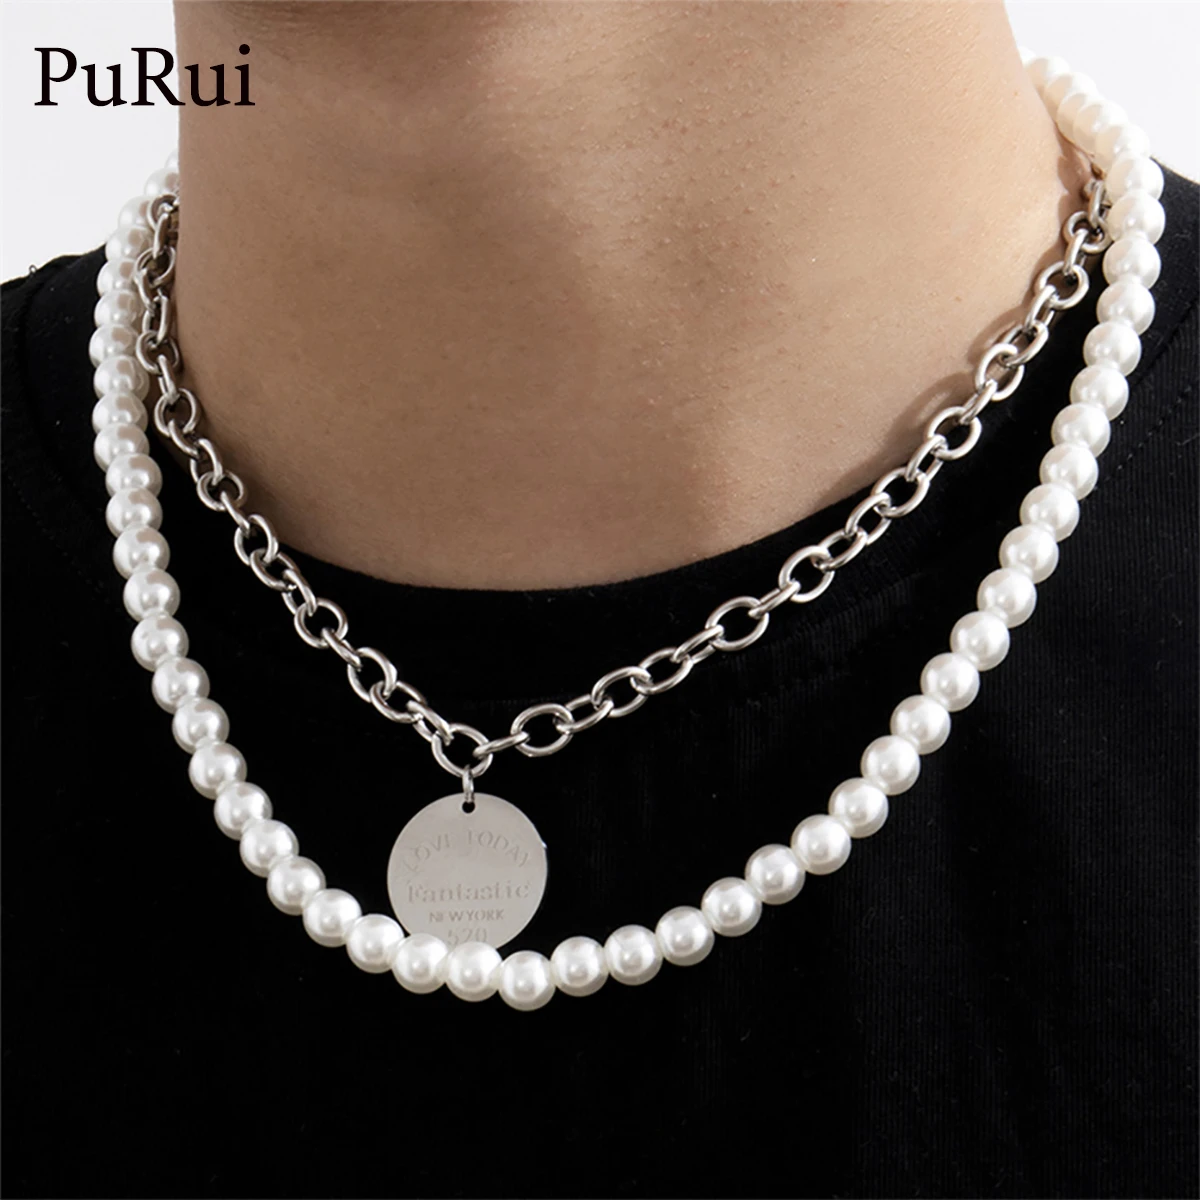 2021 INS Punk Hiphop Cuban Thick Chain Choker Necklace Set for Men Vintage Pearl Necklaces Carved Love Coin Pendant Jewelry Neck